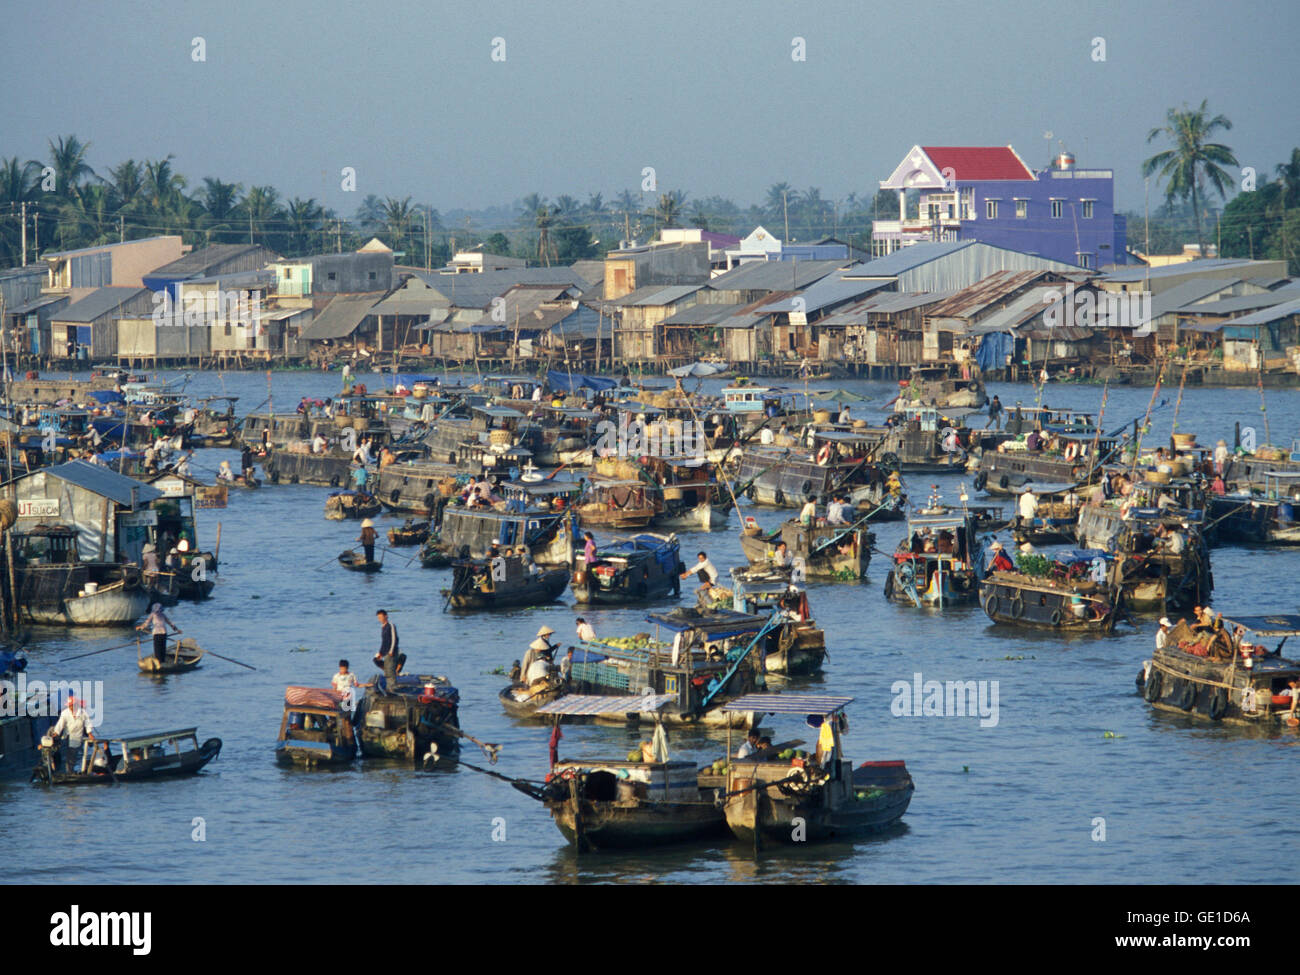 People at the Flooting Market on the Mekong River near the city of Can Tho in the Mekong Delta in Vietnam Stock Photo